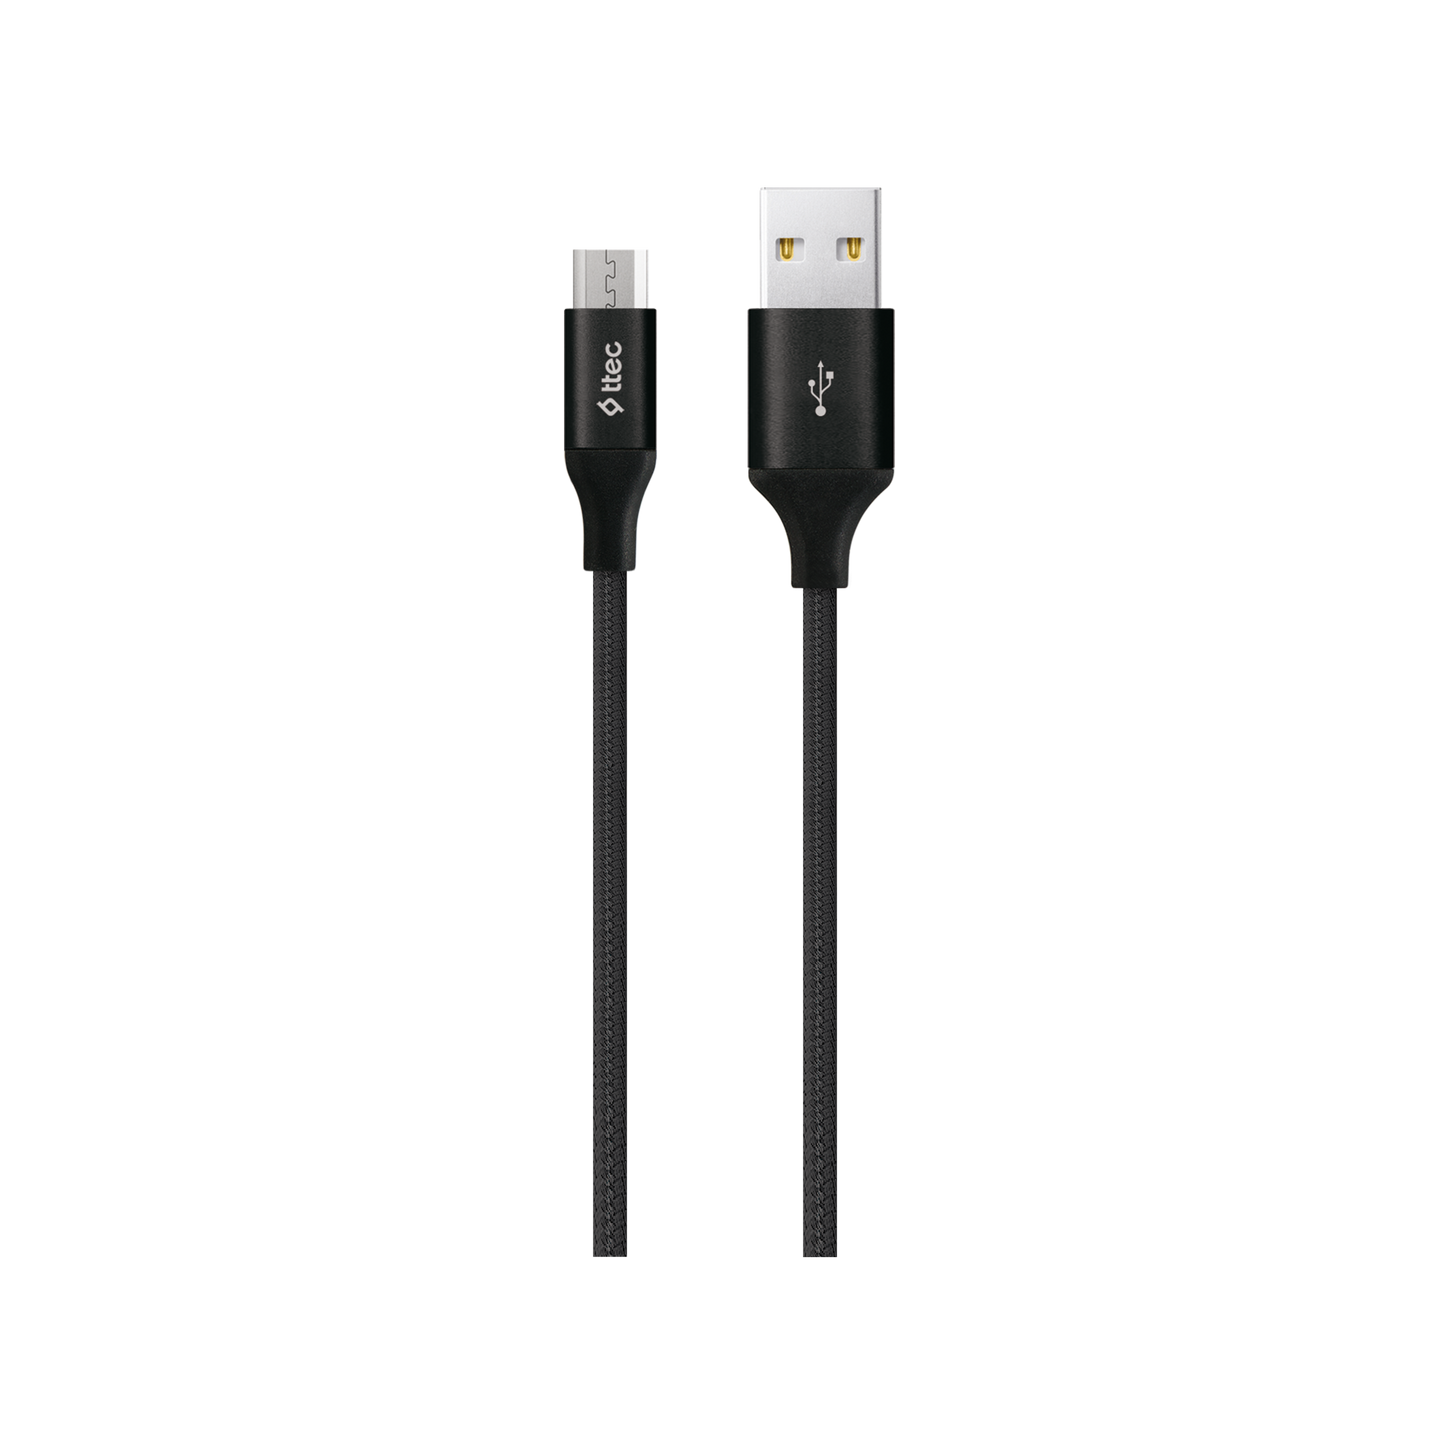 ttec - AlumiCable Micro USB Charge / Data Cable | 2.0 | XXL | 3m | Black